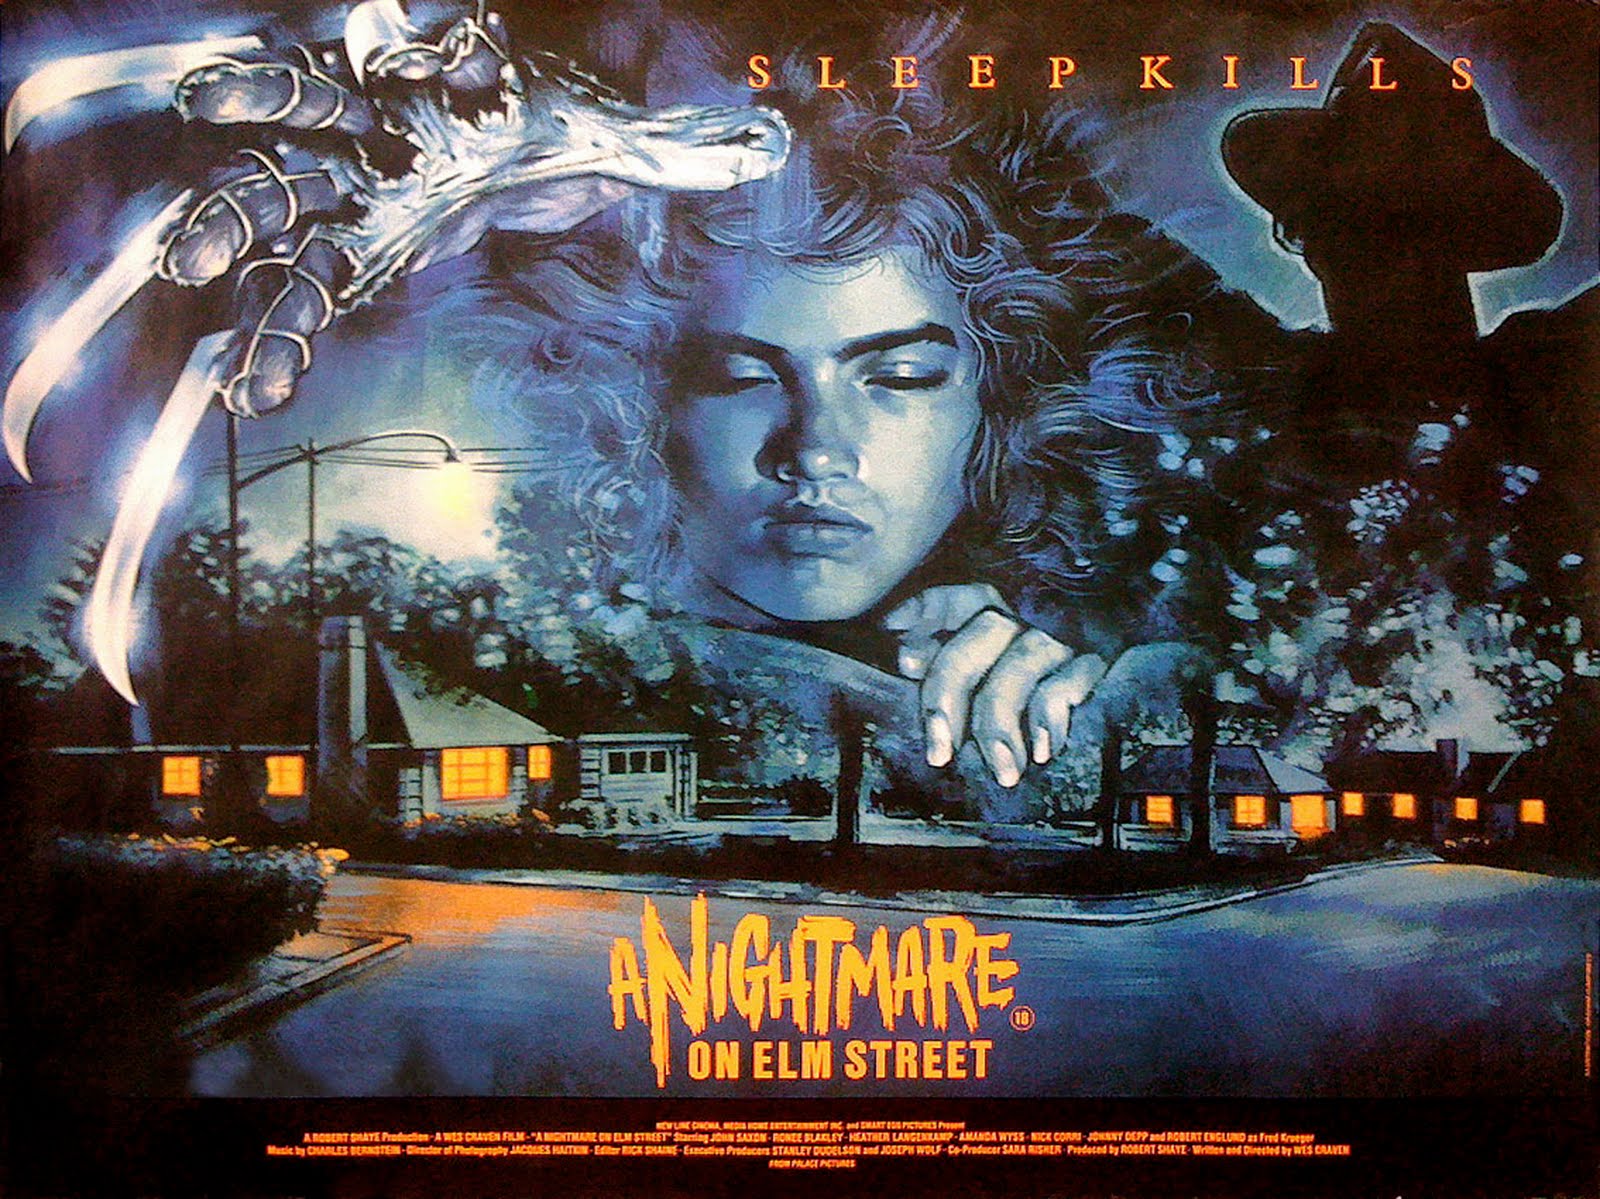 A Nightmare on Elm Street  - Ends with it all being a dream within a dream, original ending had Heather Lagenkamp waking up from the long nightmare to discover that all the horrible murders she envisioned were just a dream. But someone asked "What about the sequels?" so Freddy turned out to be real in the re-worked ending.